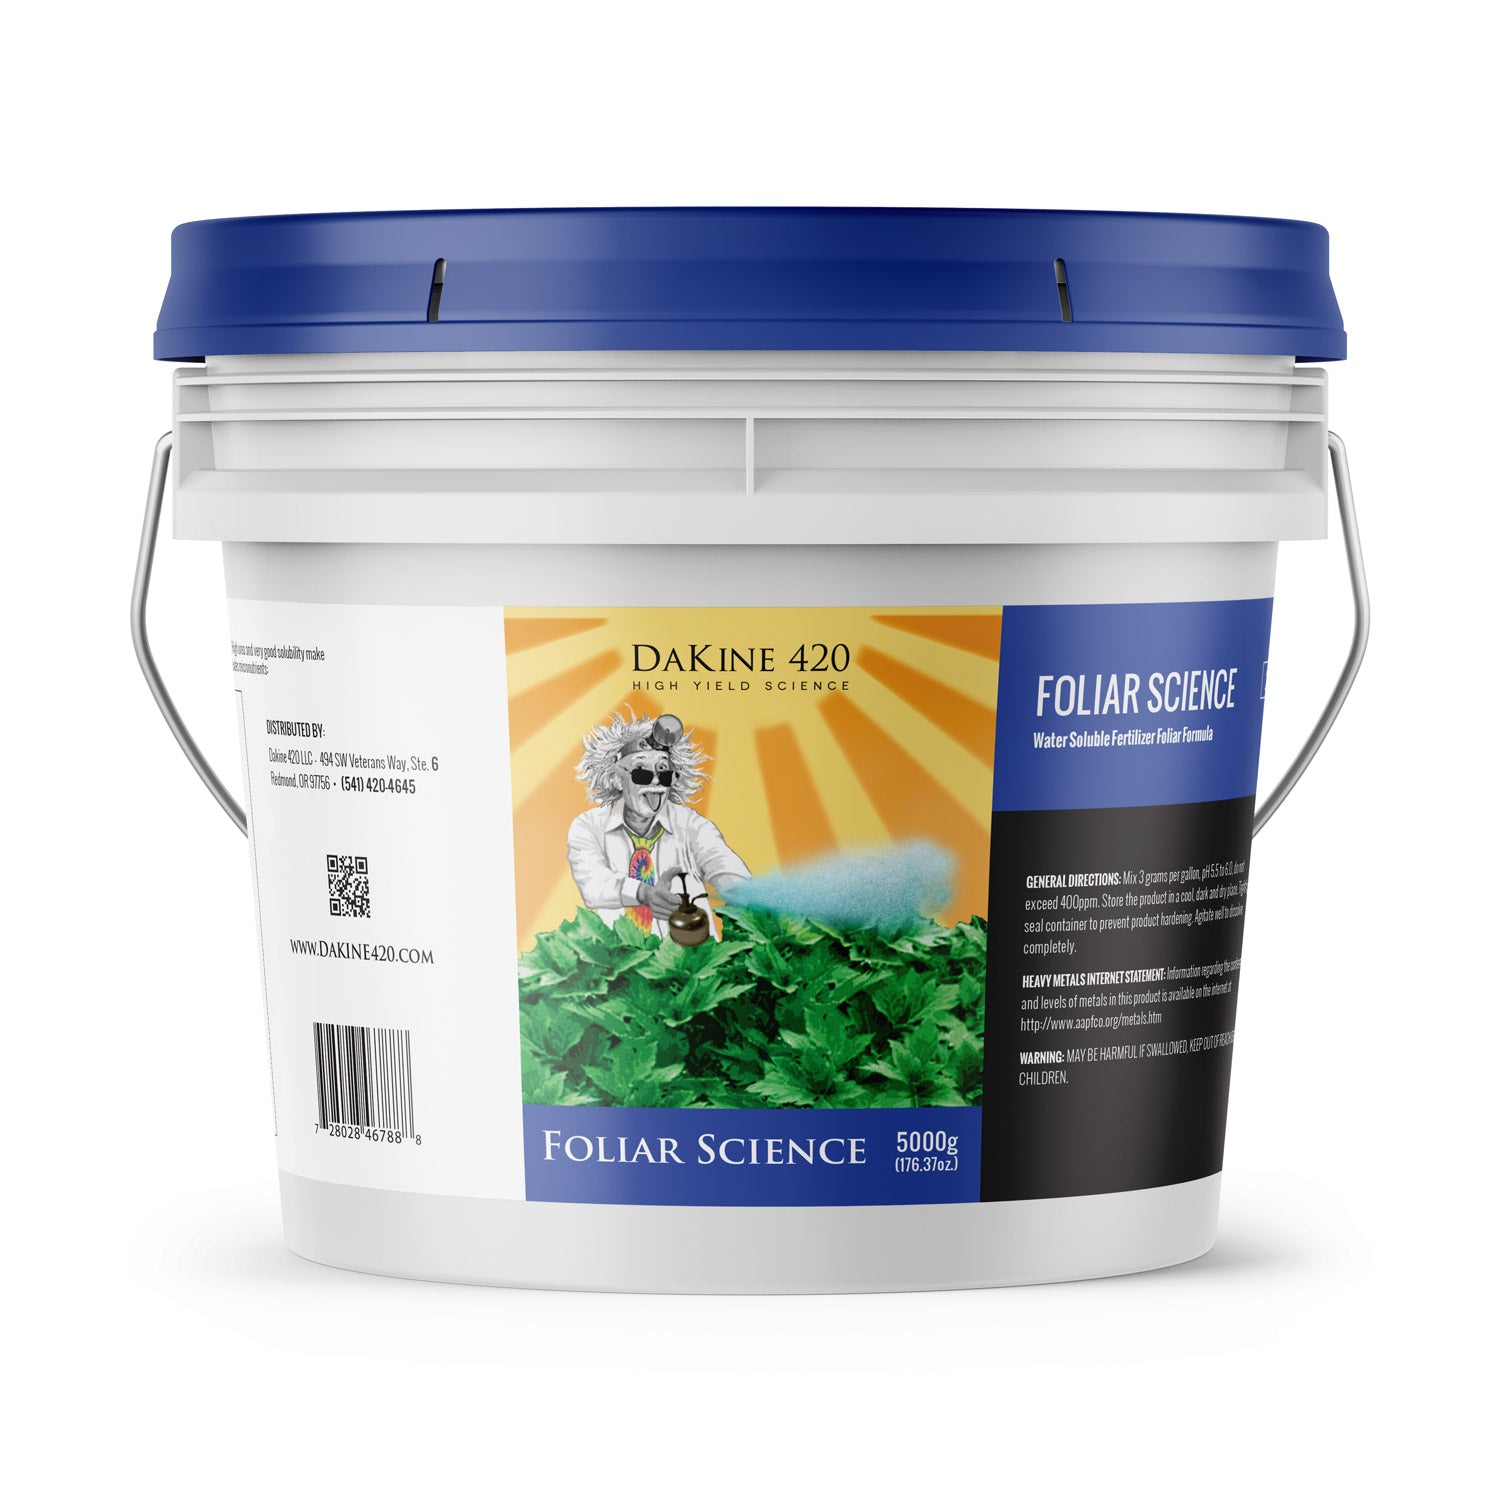 5,000g Foliar Science, our 29-9-9 plant-ready nitrogen delivery supplement. With 26% Urea, the most absorbent form of nitrogen